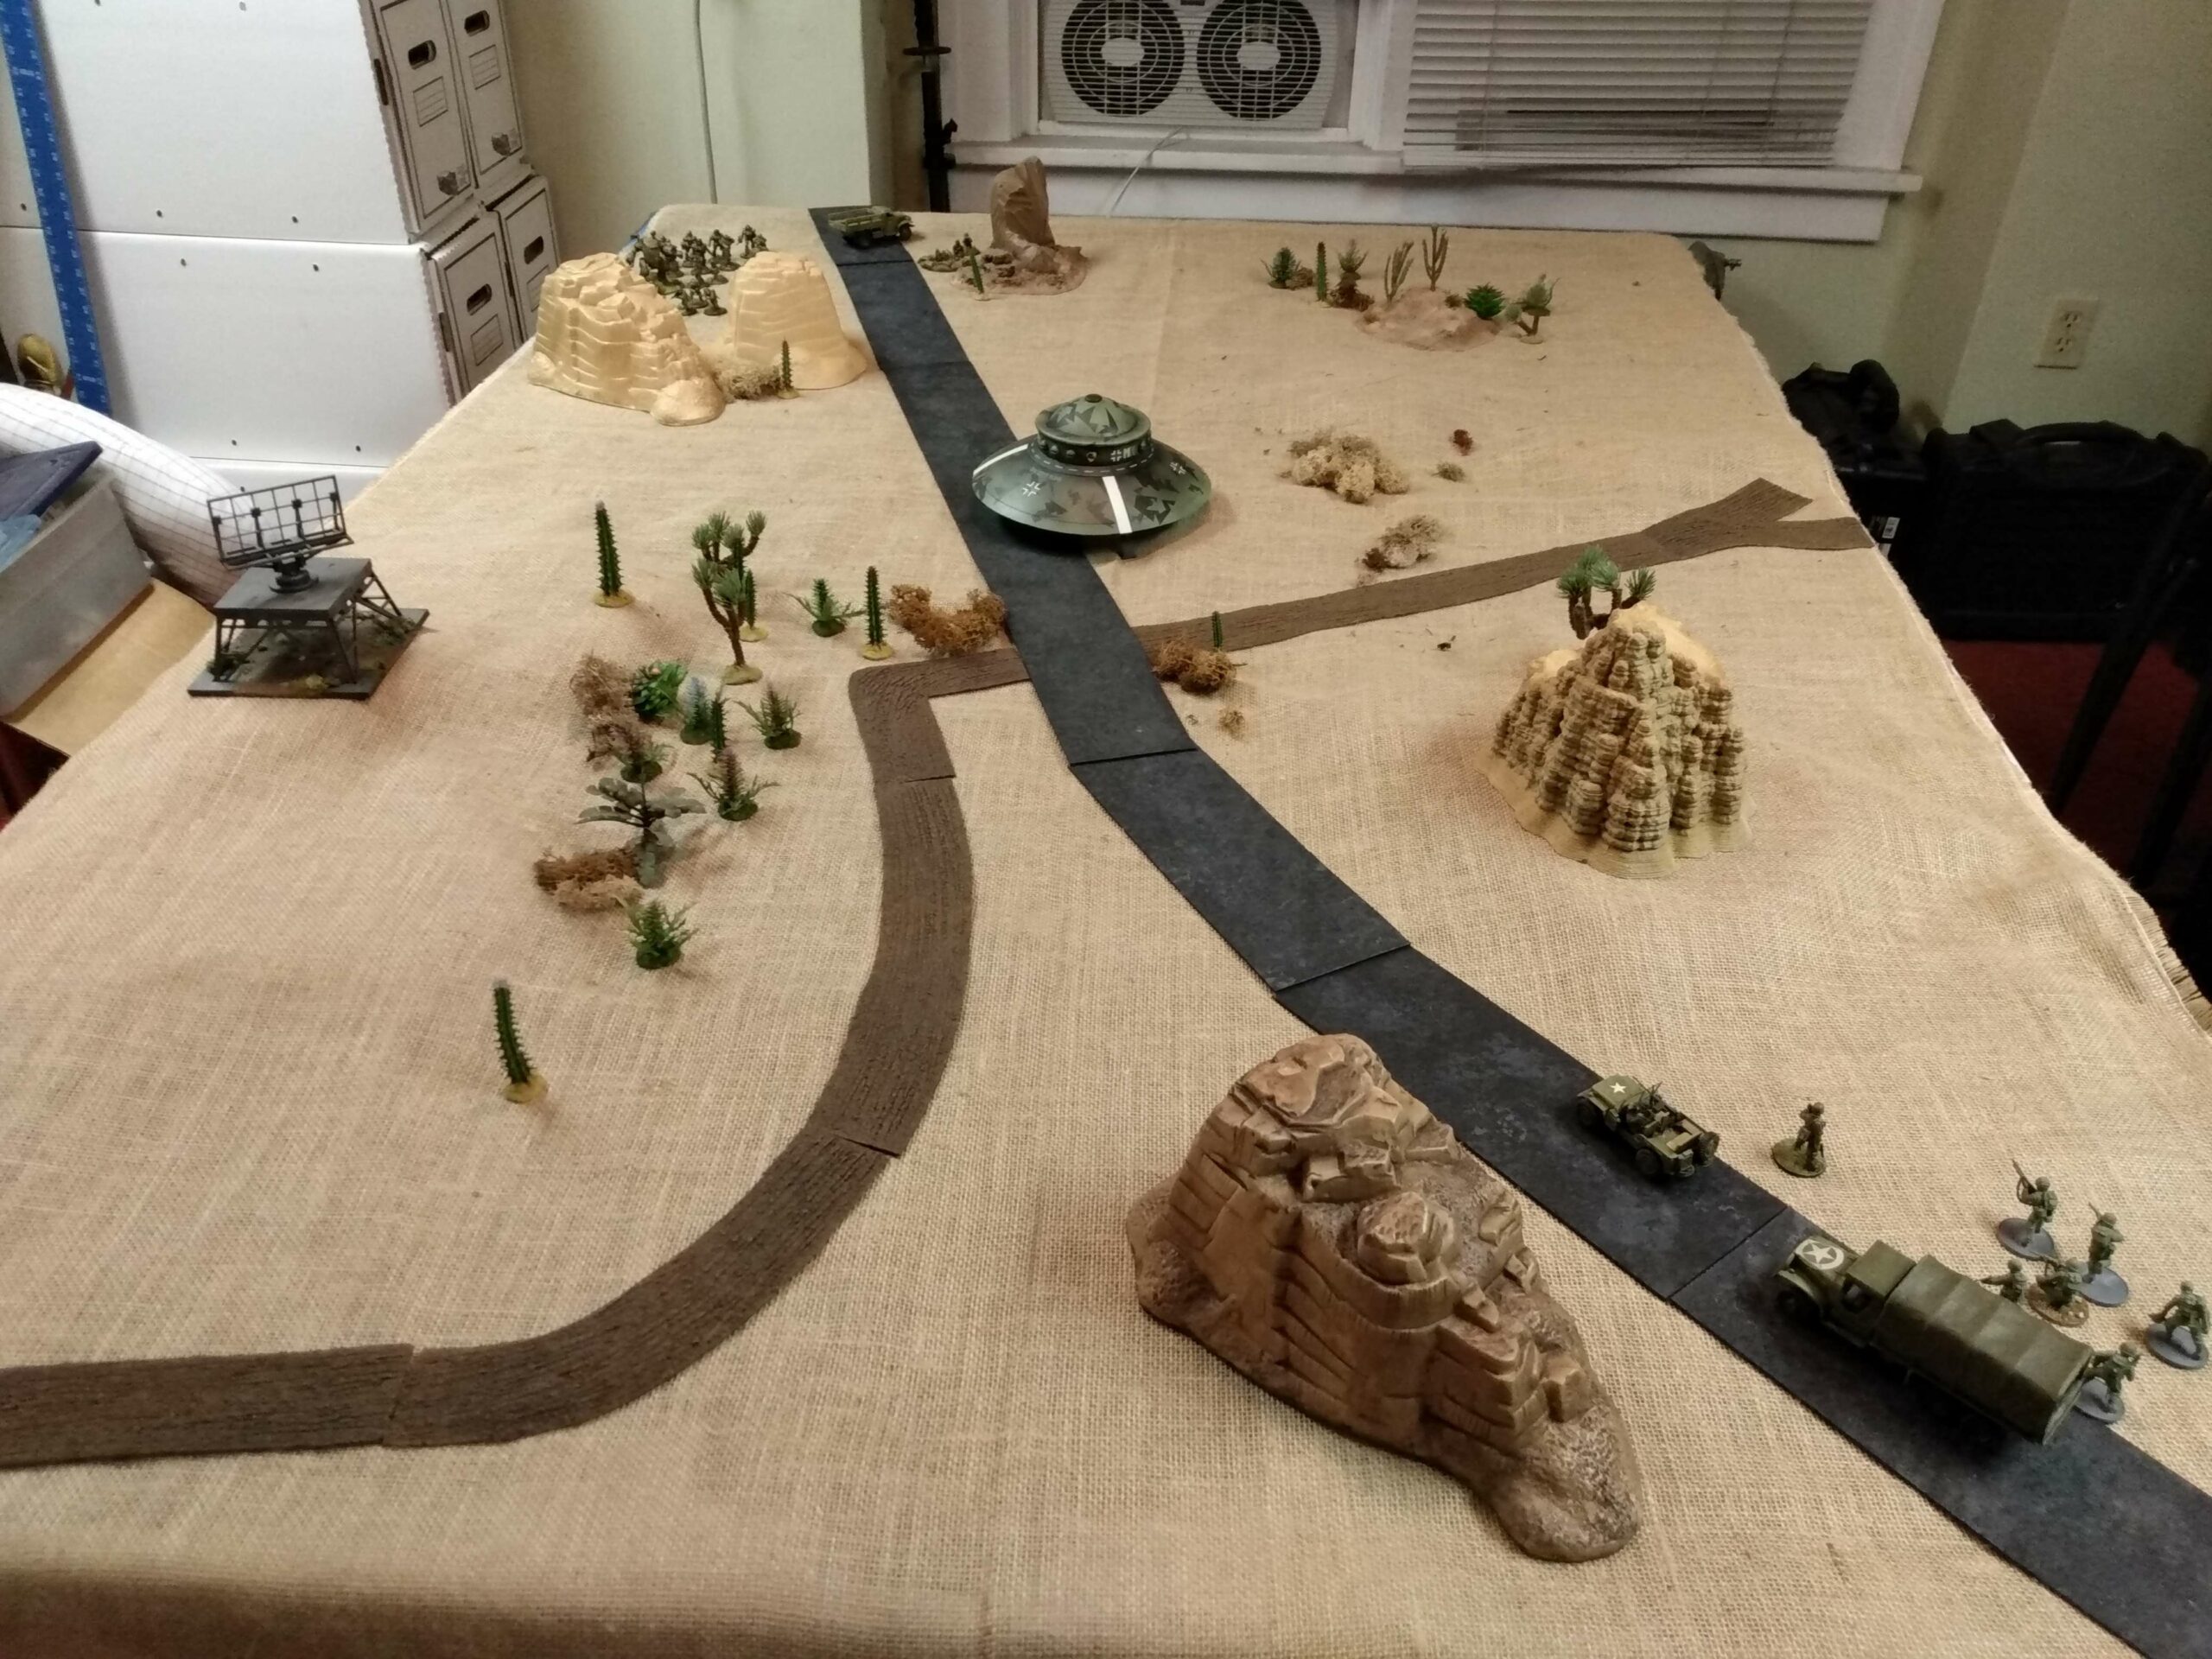 WW2 desert wargaming table with a UFO in the center and army troops surrounding it.